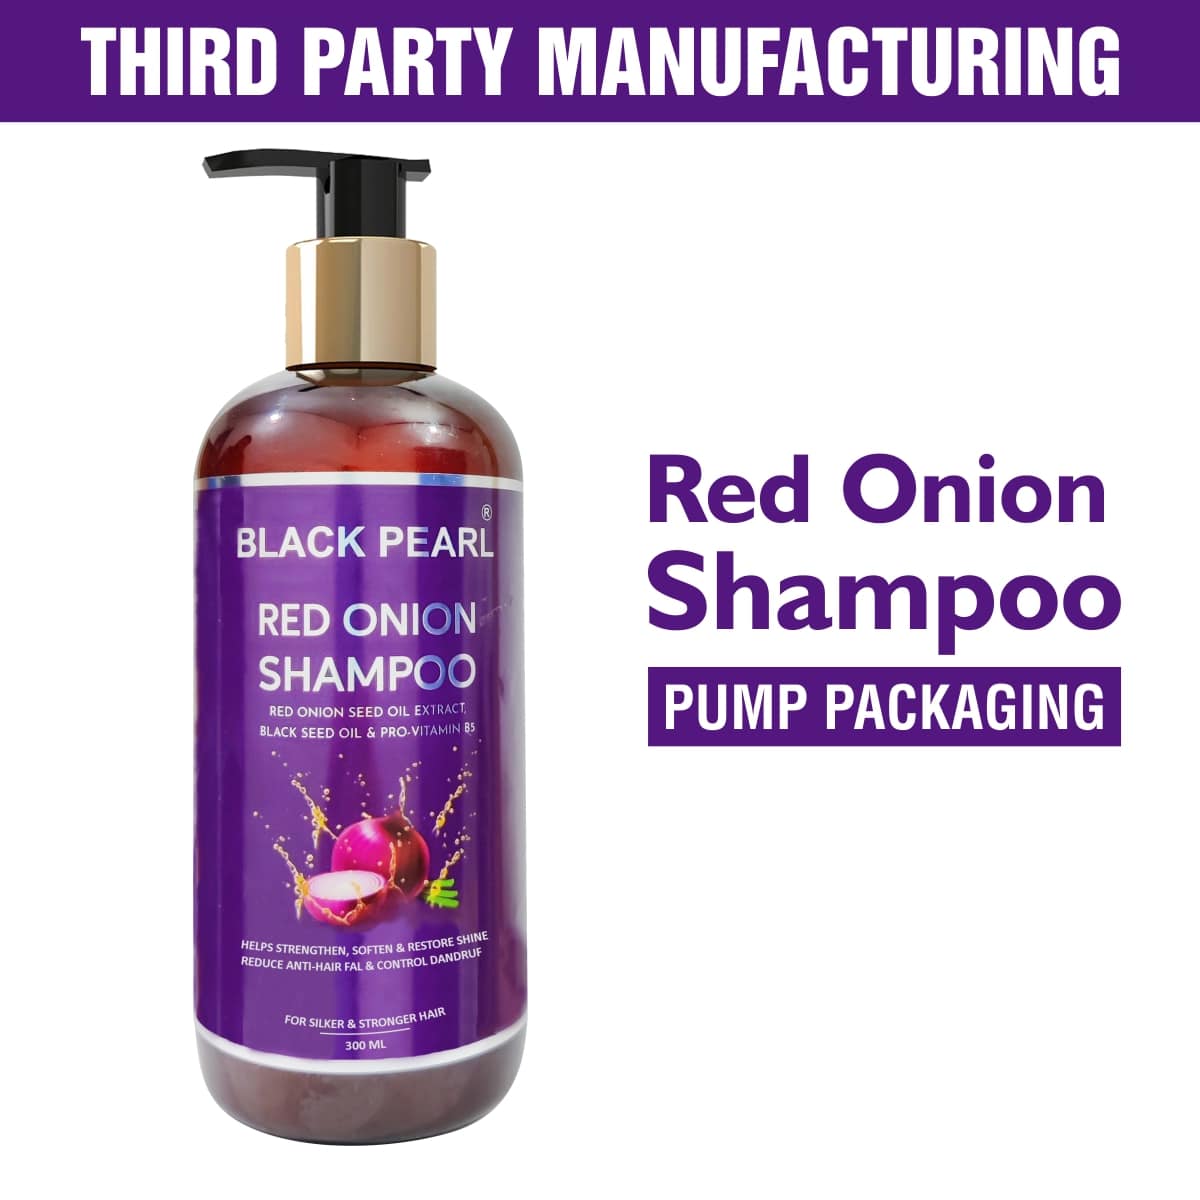 Red Onion Shampoo Third Party Manufacturing